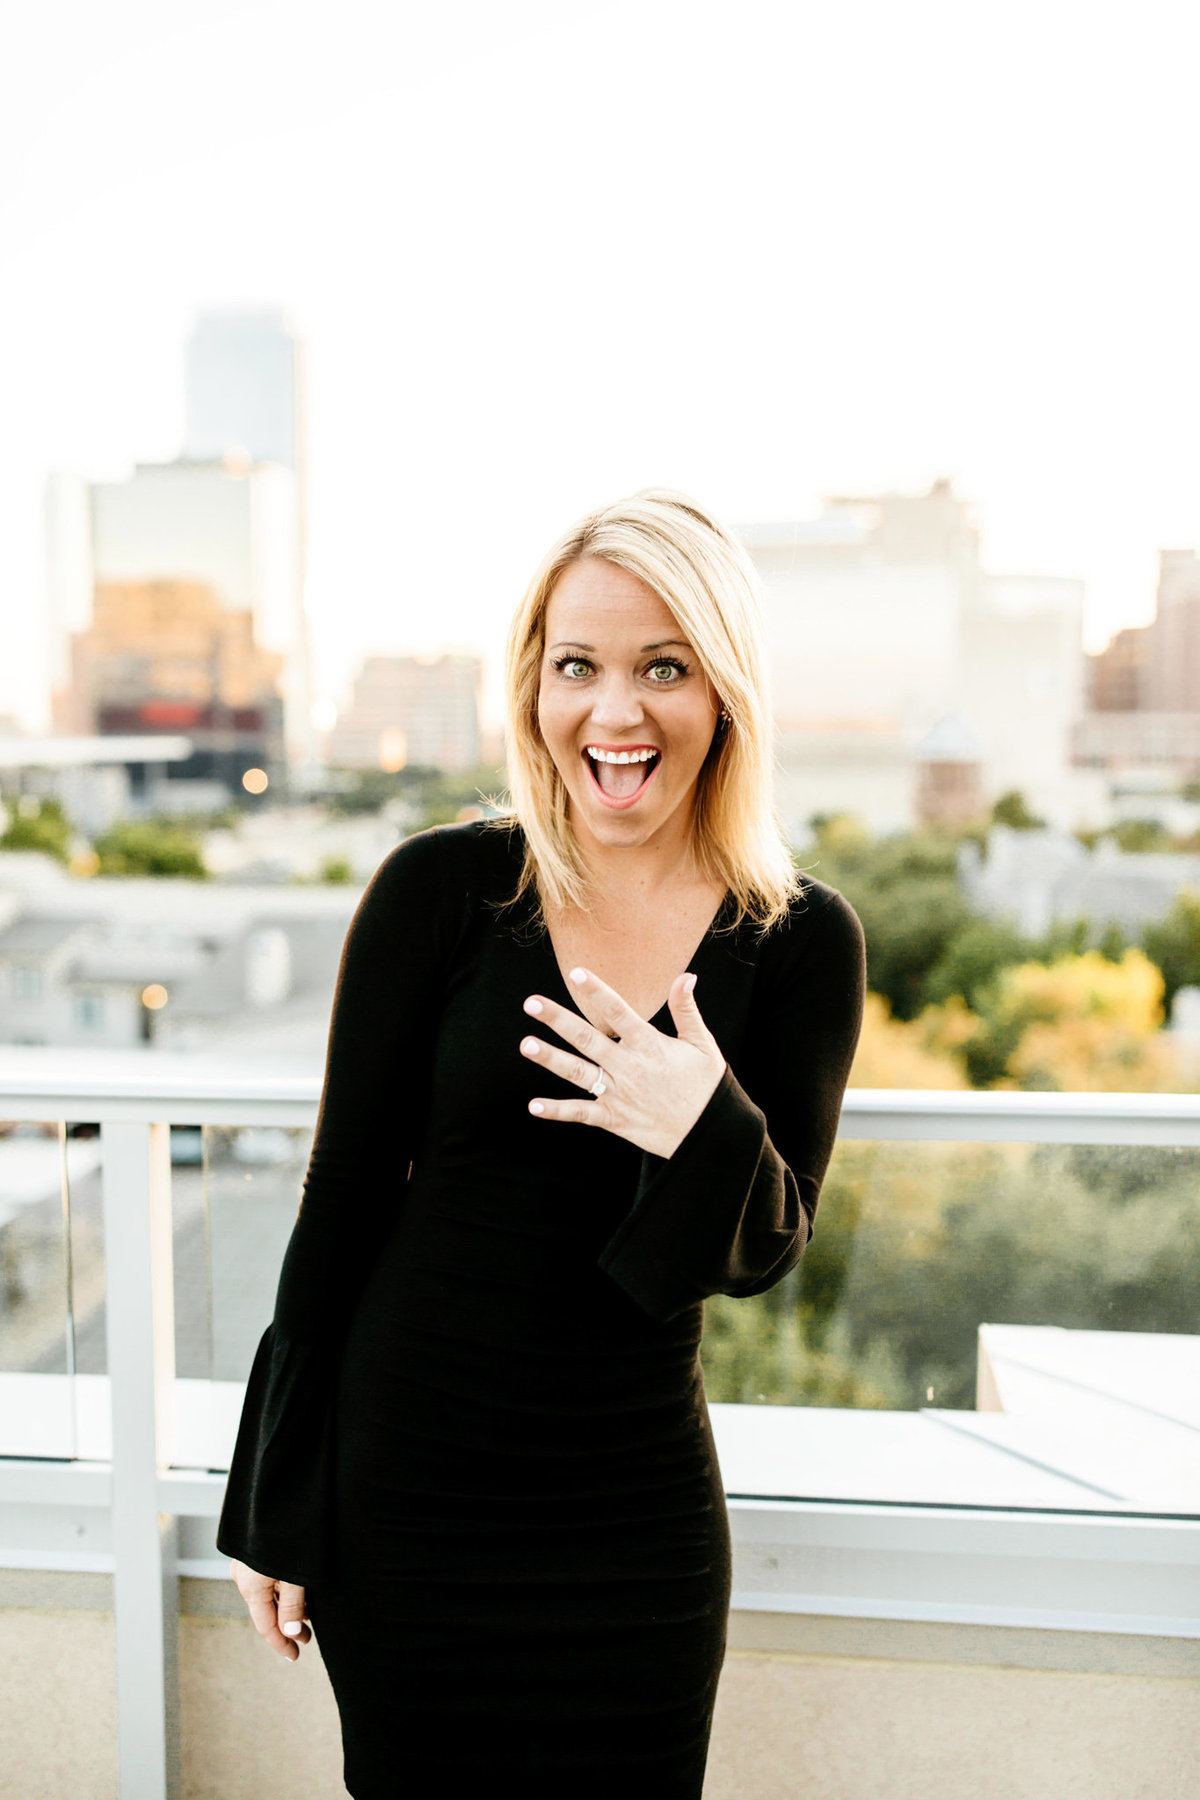 Eric & Megan - Downtown Dallas Rooftop Proposal & Engagement Session-103